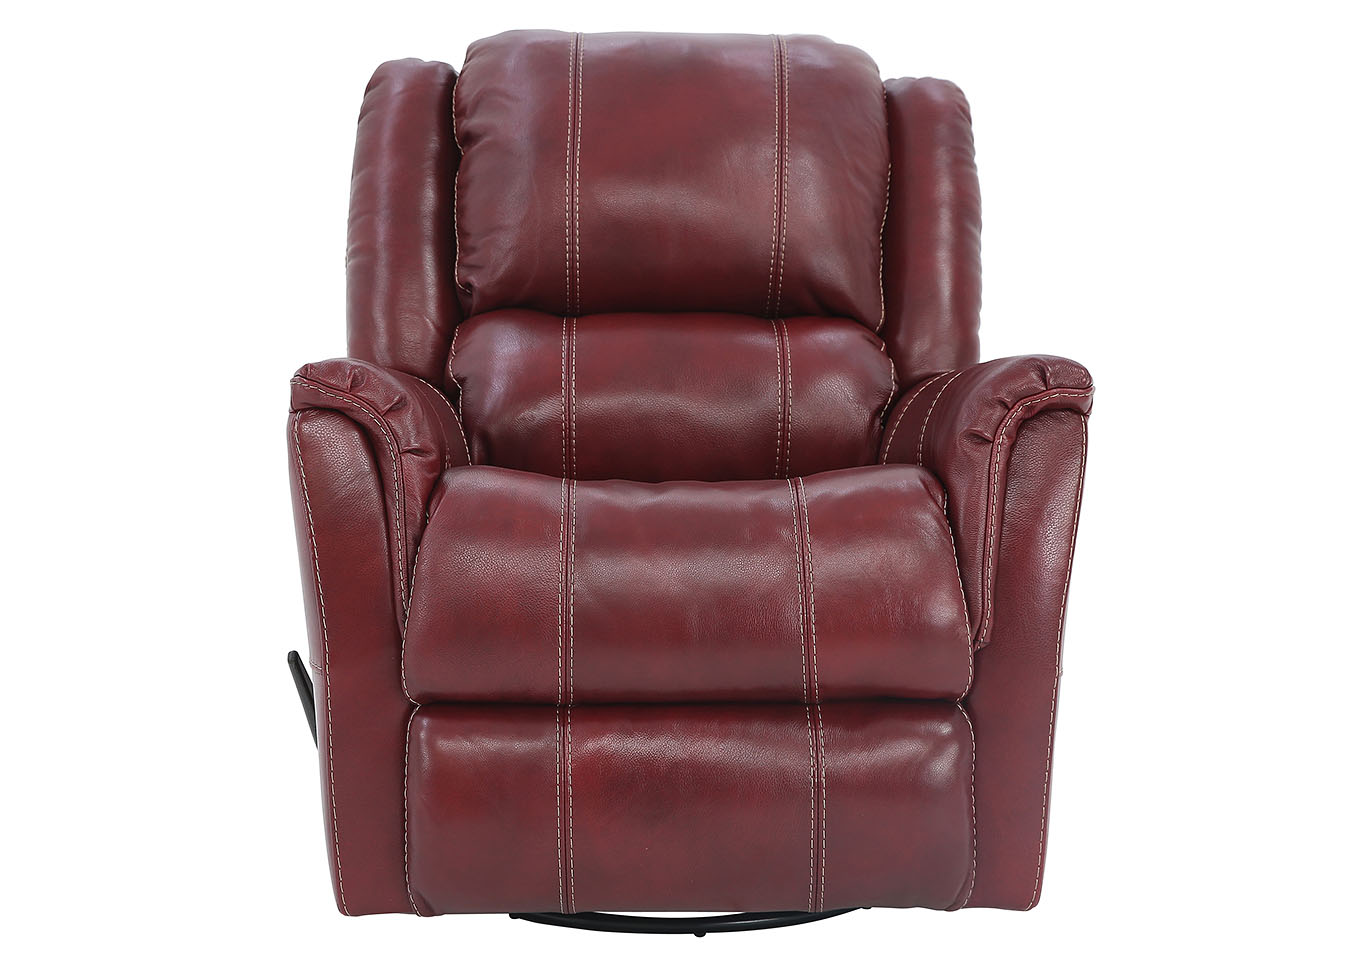 Bryce Red Leather Swivel Glider, Leather Rocker Recliner Chairs